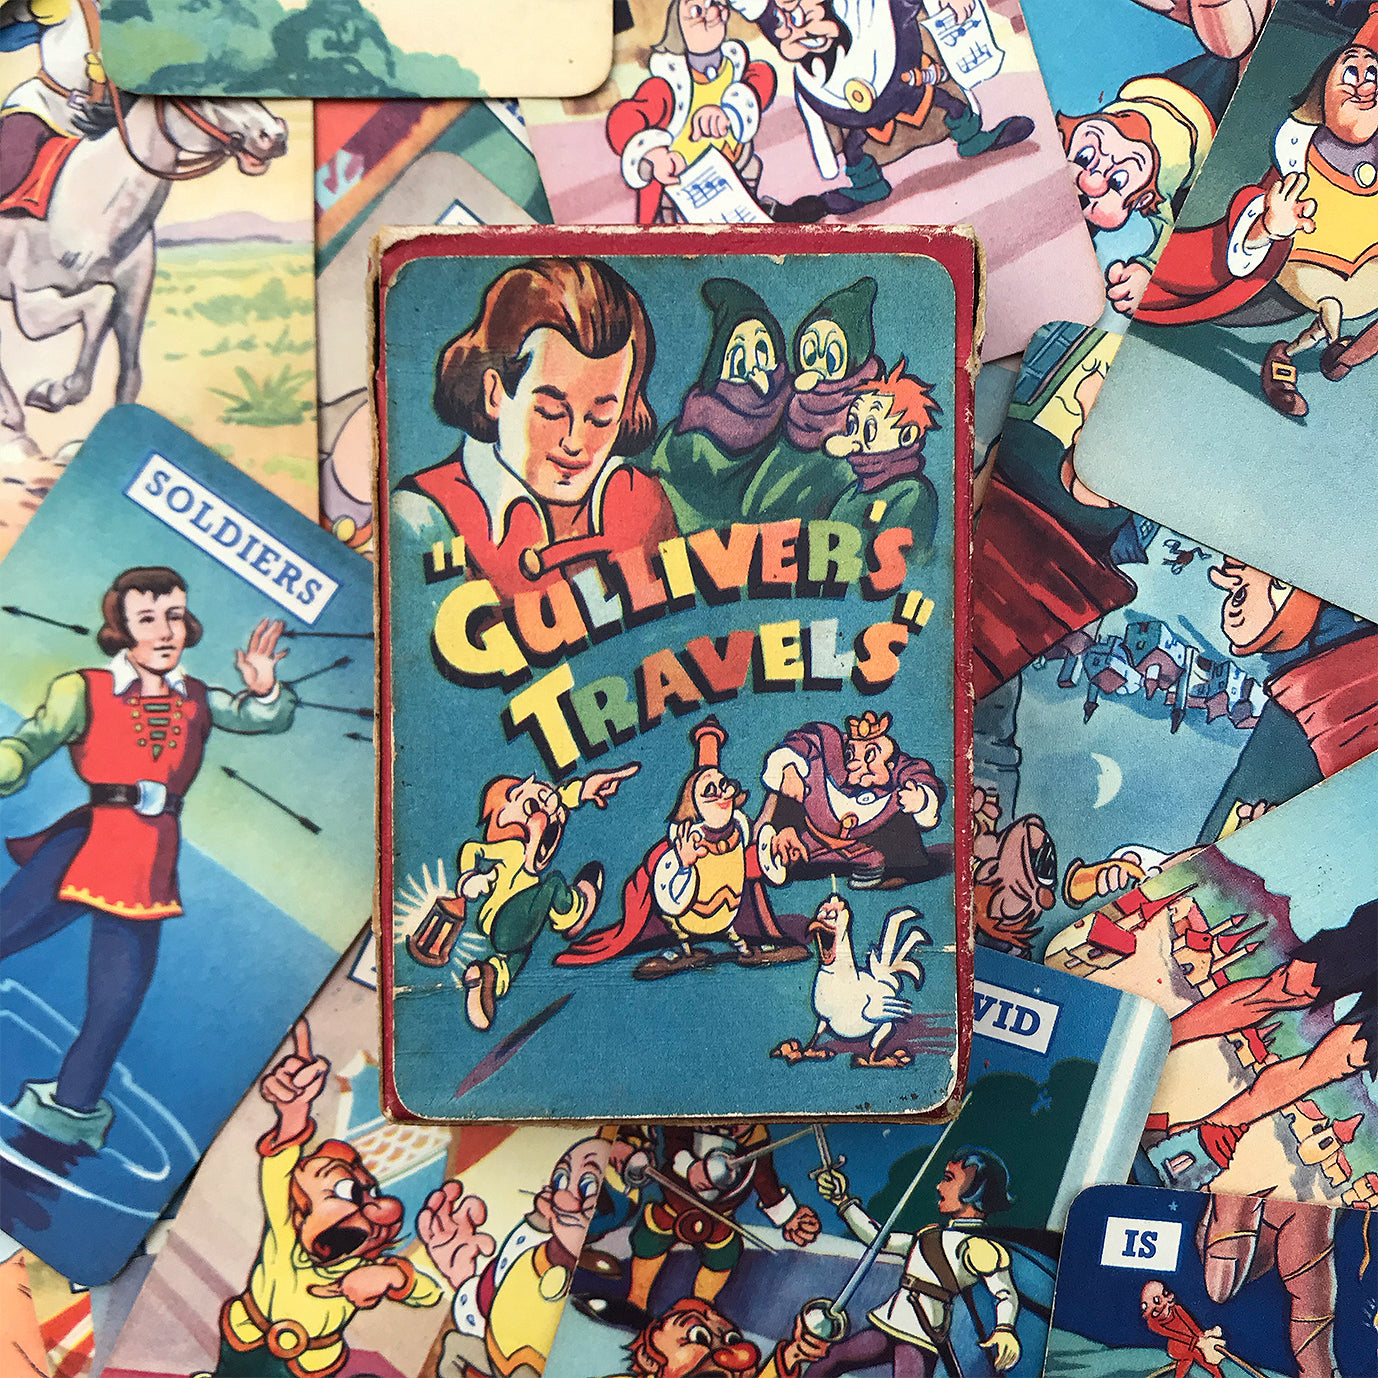 Vintage Pepys illustrated card game from the 1940's - Gulliver's Travels! It has the most charming, fun illustrations of all the characters from Gulliver's travels to Lilliput. - SHOP NOW - www.intovintage.co.uk